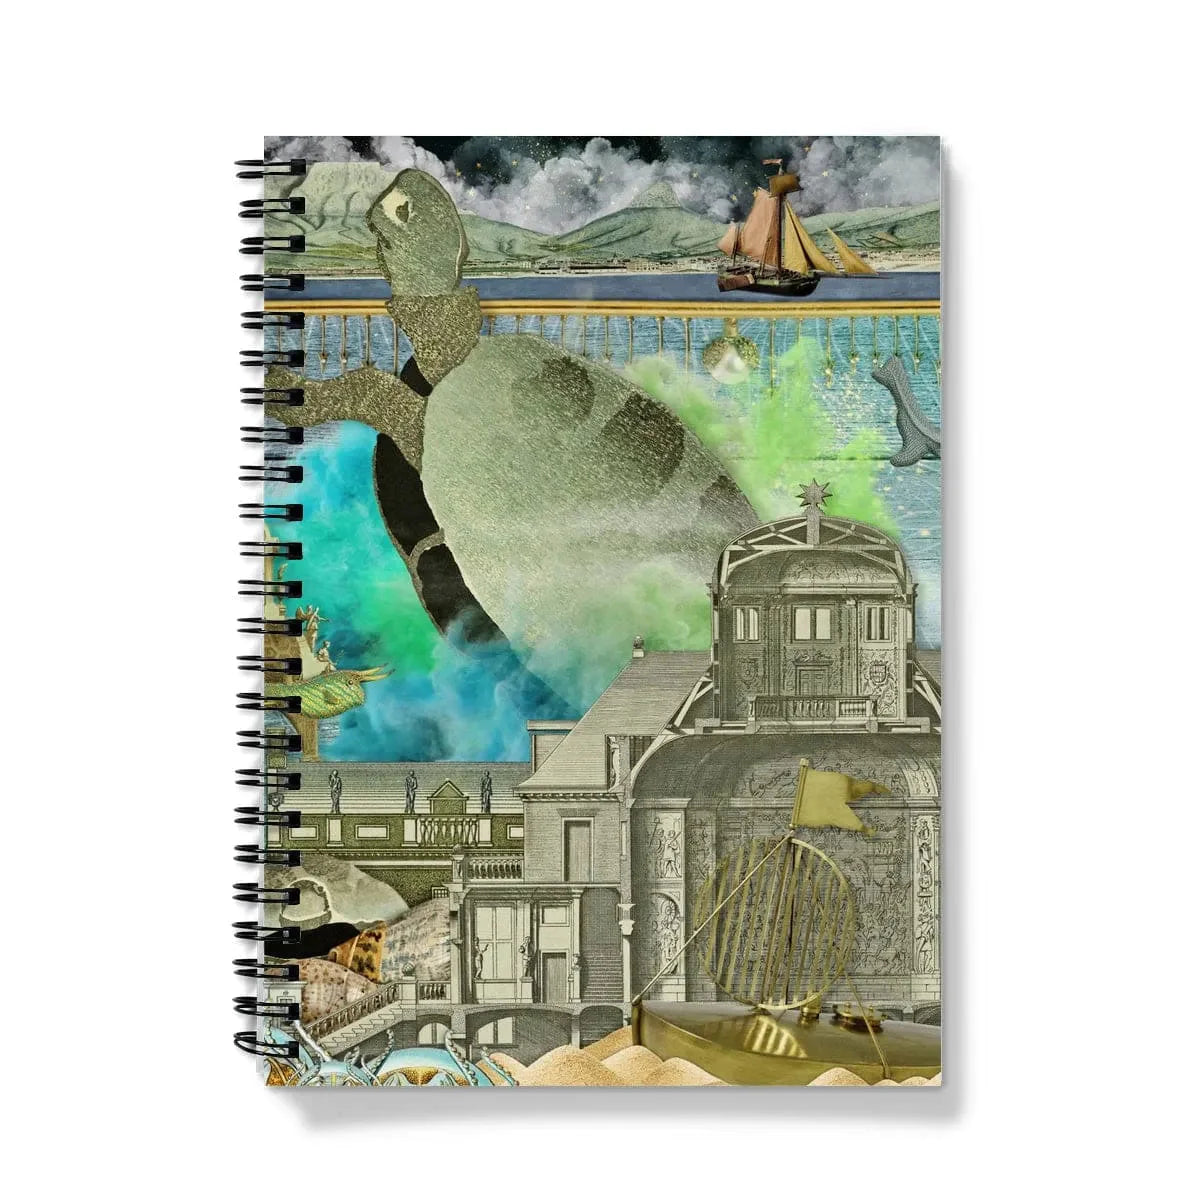 Down Where It’s Wetter Part 3 Notebook - A5 - Lined Paper - Notebooks & Notepads - Aesthetic Art